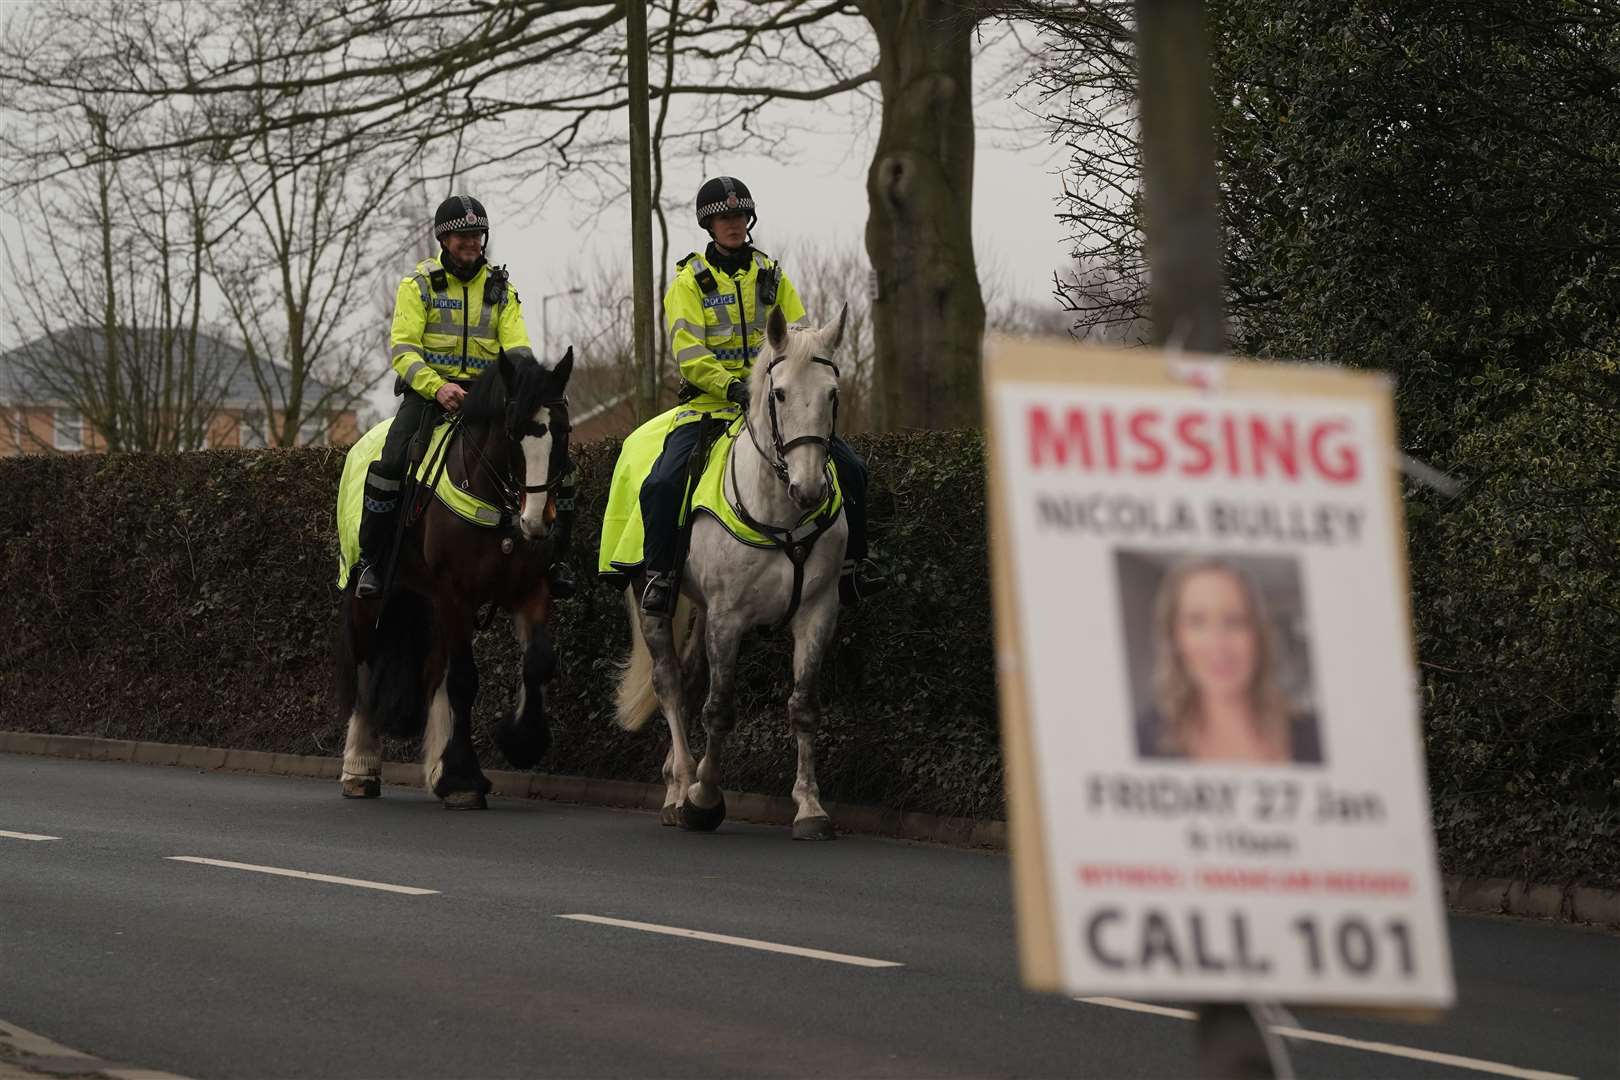 Mounted police officers along the main road in the village of St Michael’s on Wyre (Owen Humphreys/PA)